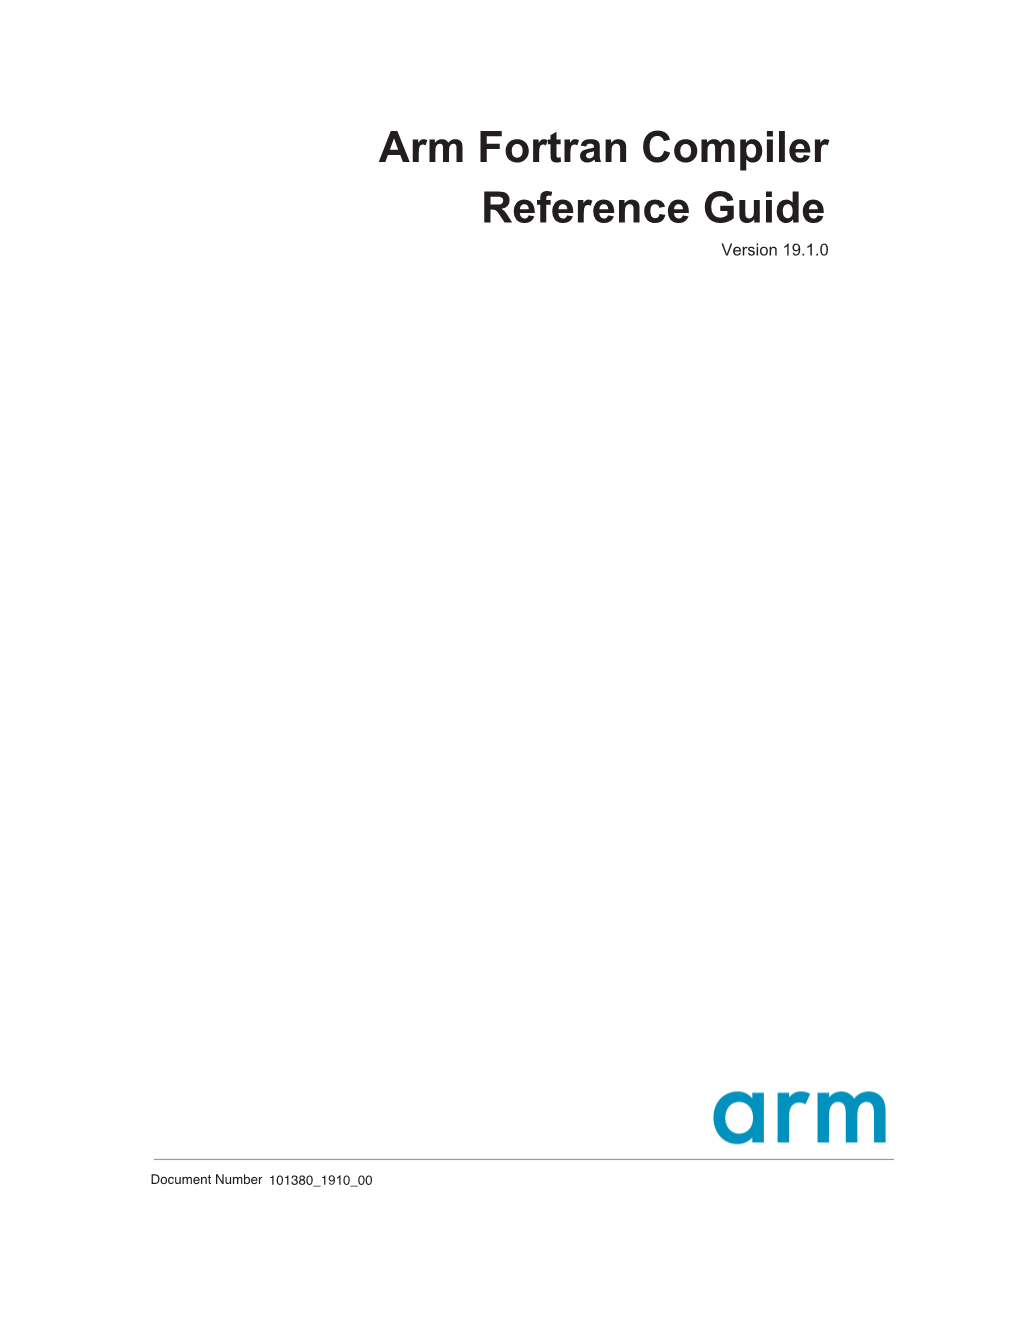 Arm Fortran Compiler Reference Guide Version 19.1.0